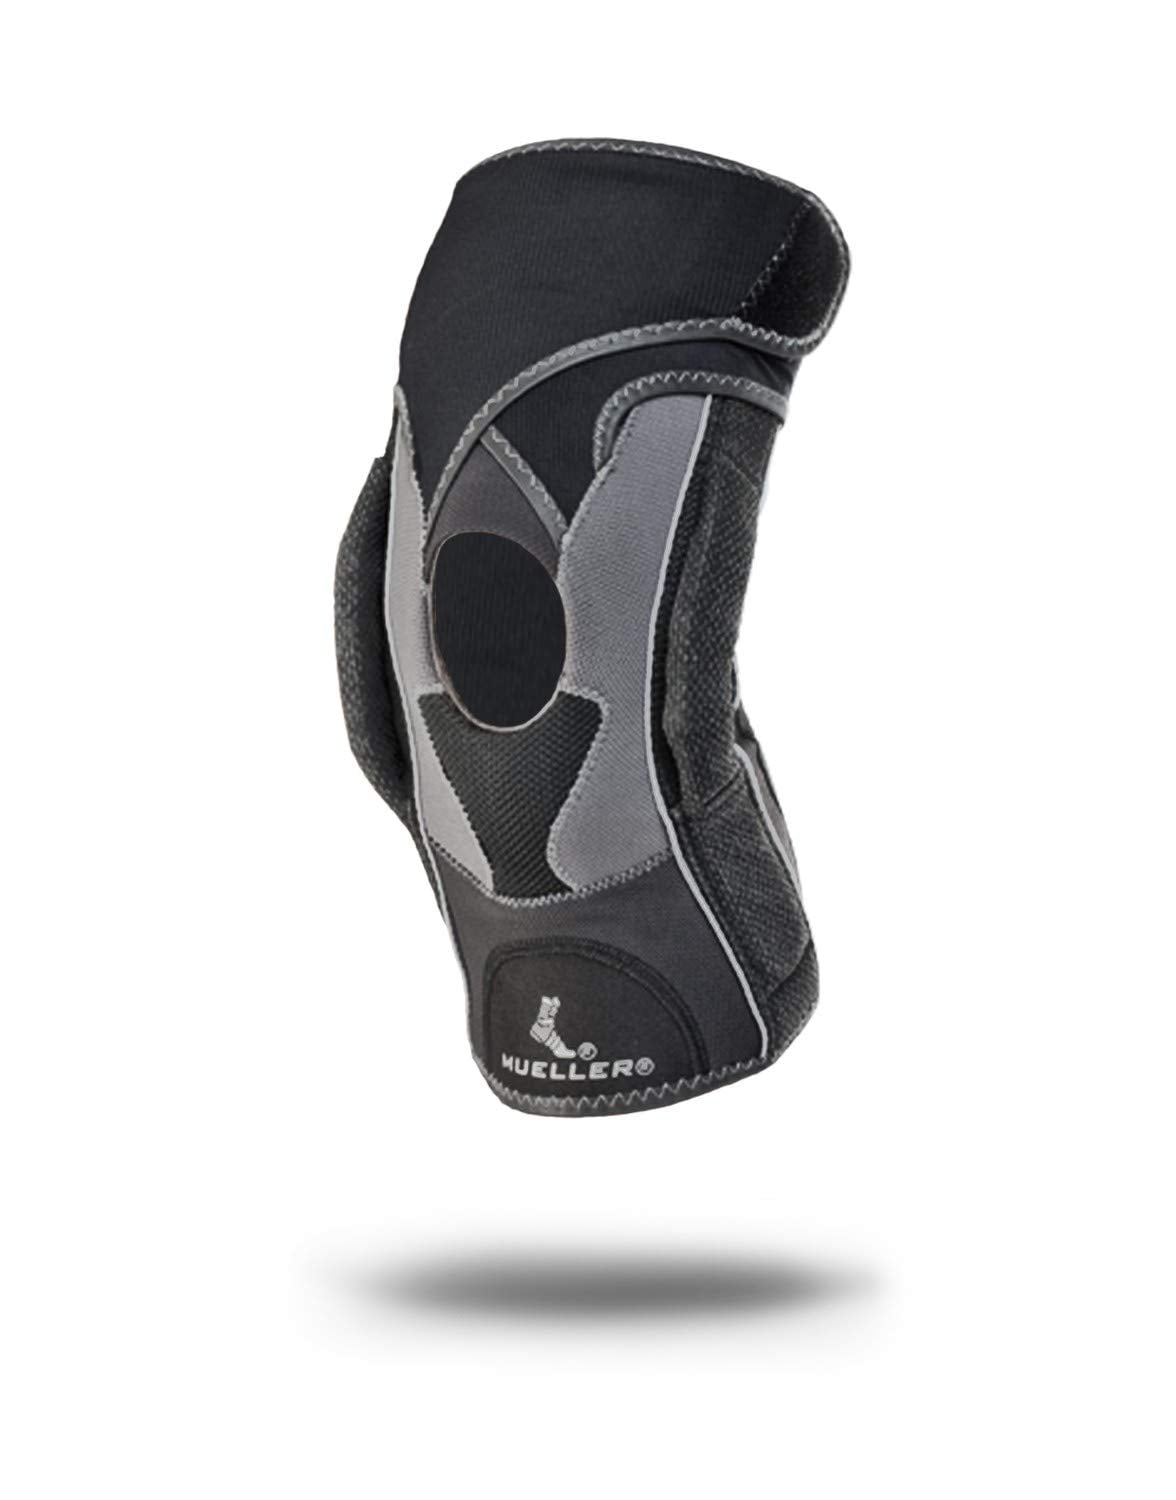 Mueller Hg80 Premium Left or Right Knee Brace with Hinge and Adjustable ...